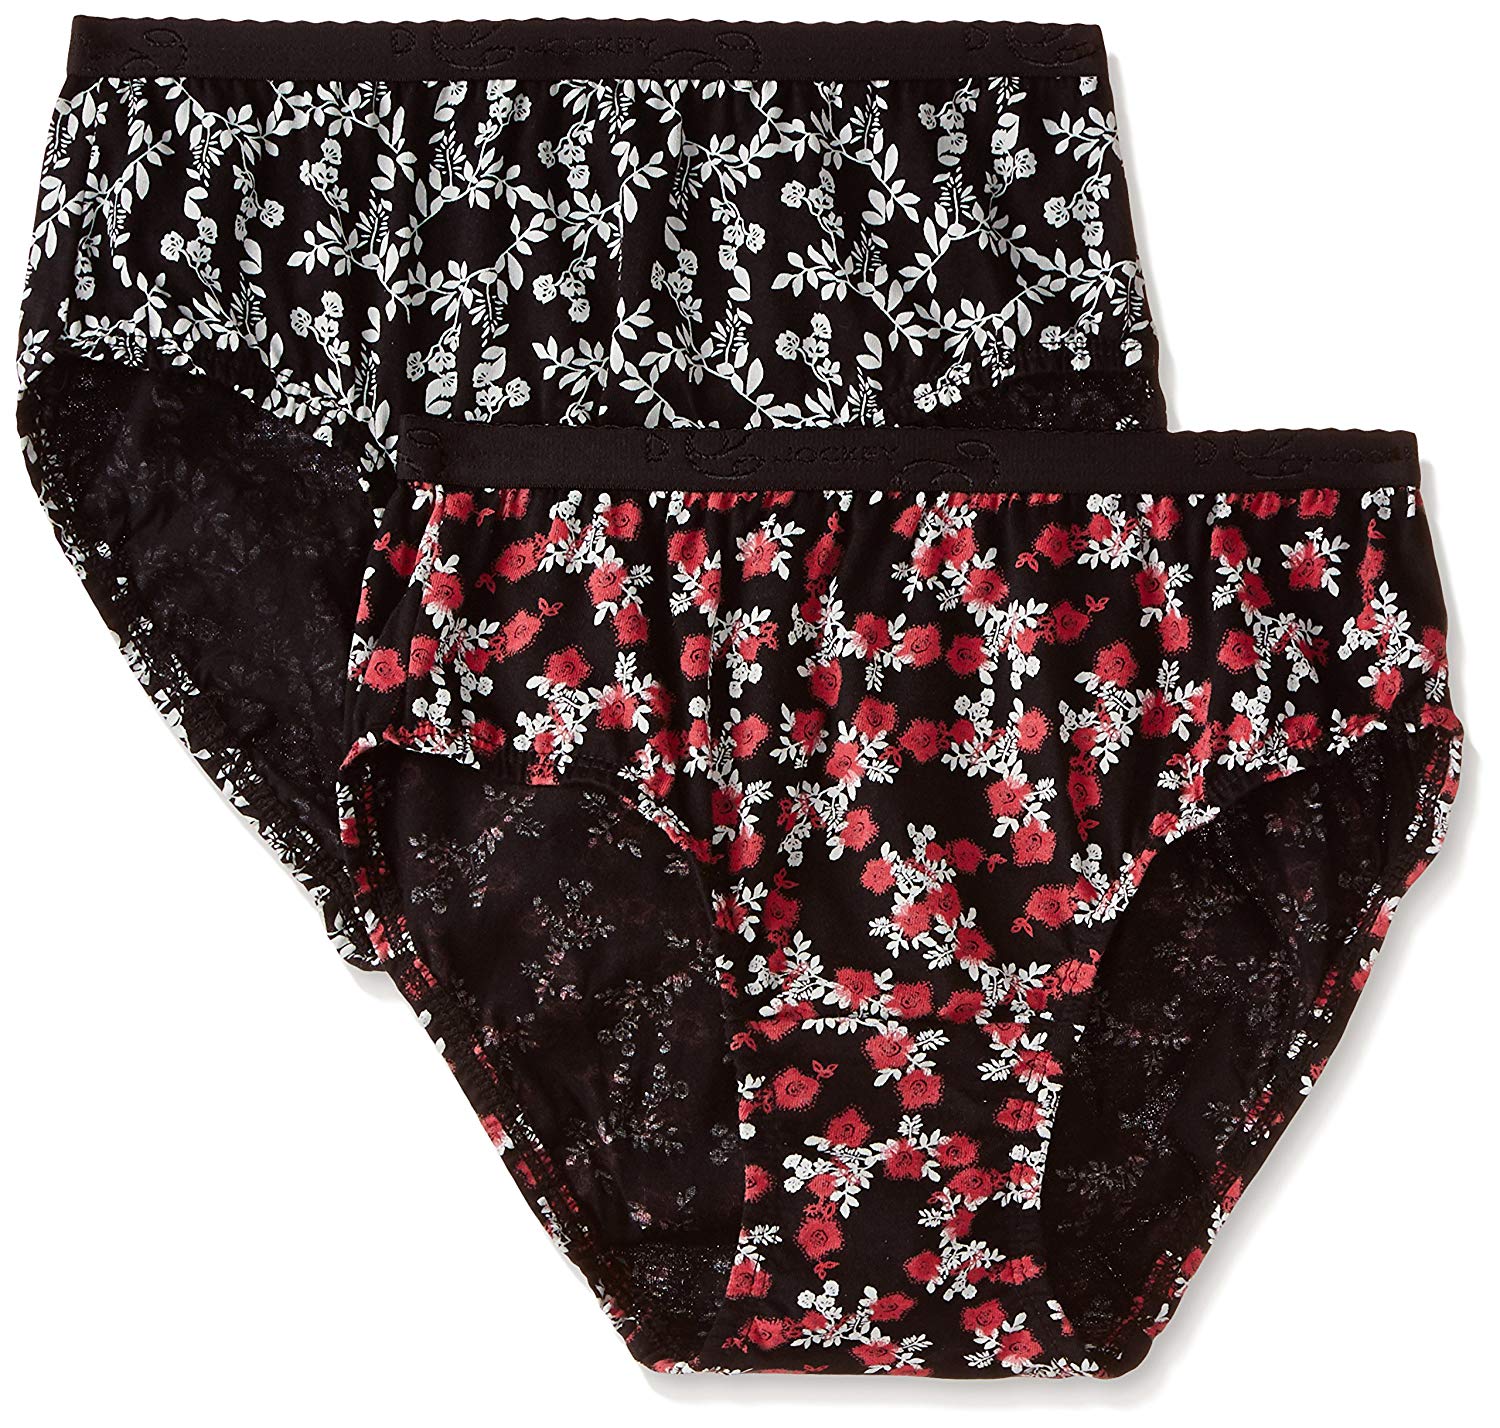 Cotton HIPSTER PANTY CHETNA at Rs 125/piece in Bhiwandi